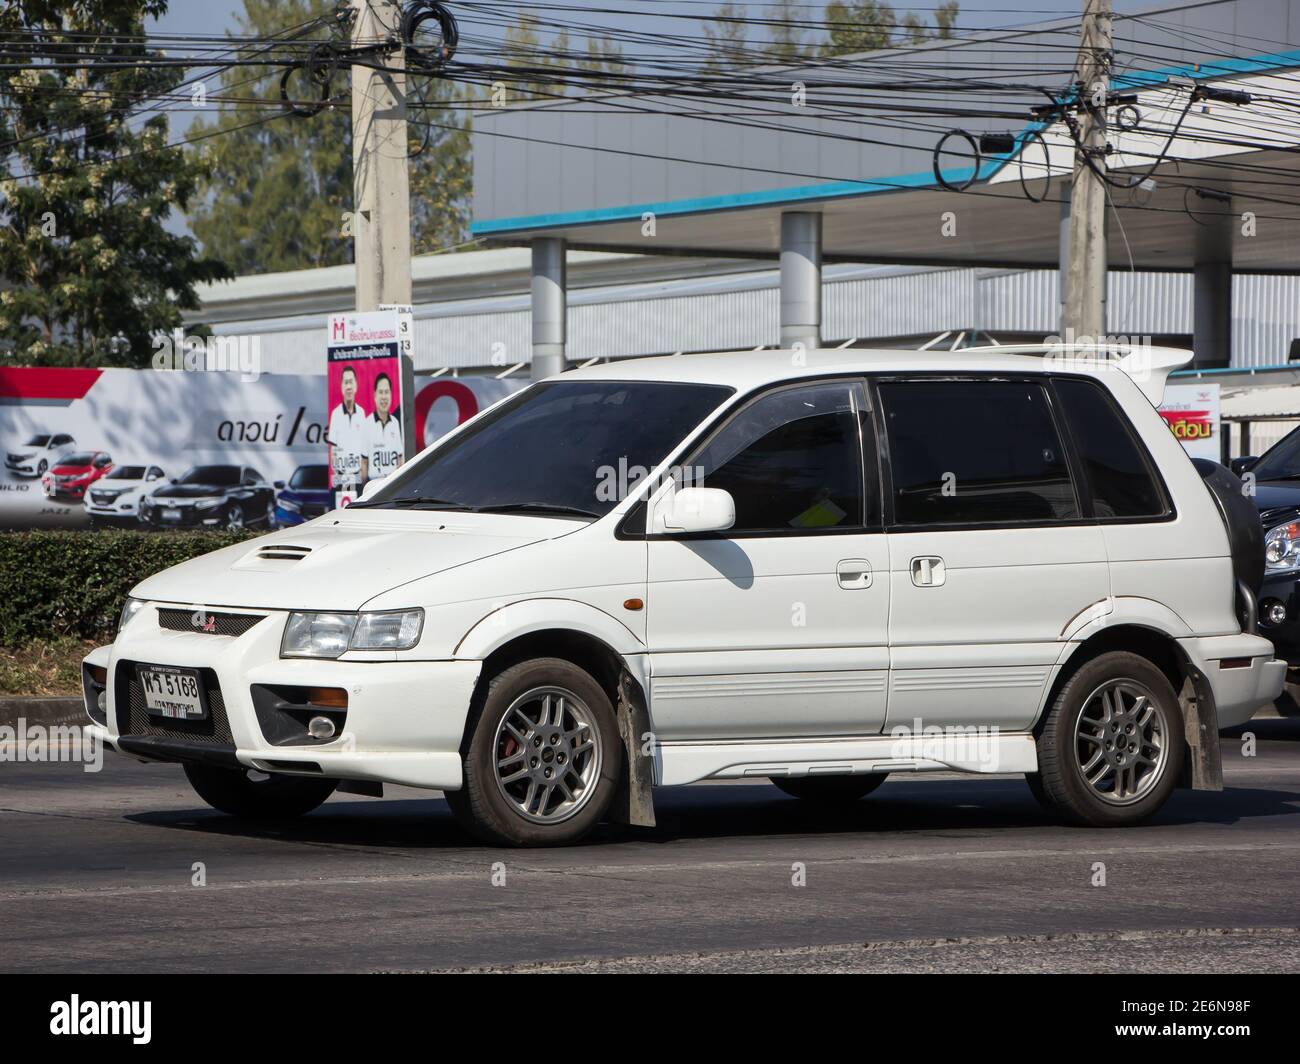 Chiangmai, Thailand - December 17 2020: Private Mitsubishi Space Runner Van Car. On road no.1001, 8 km from Chiangmai city. Stock Photo